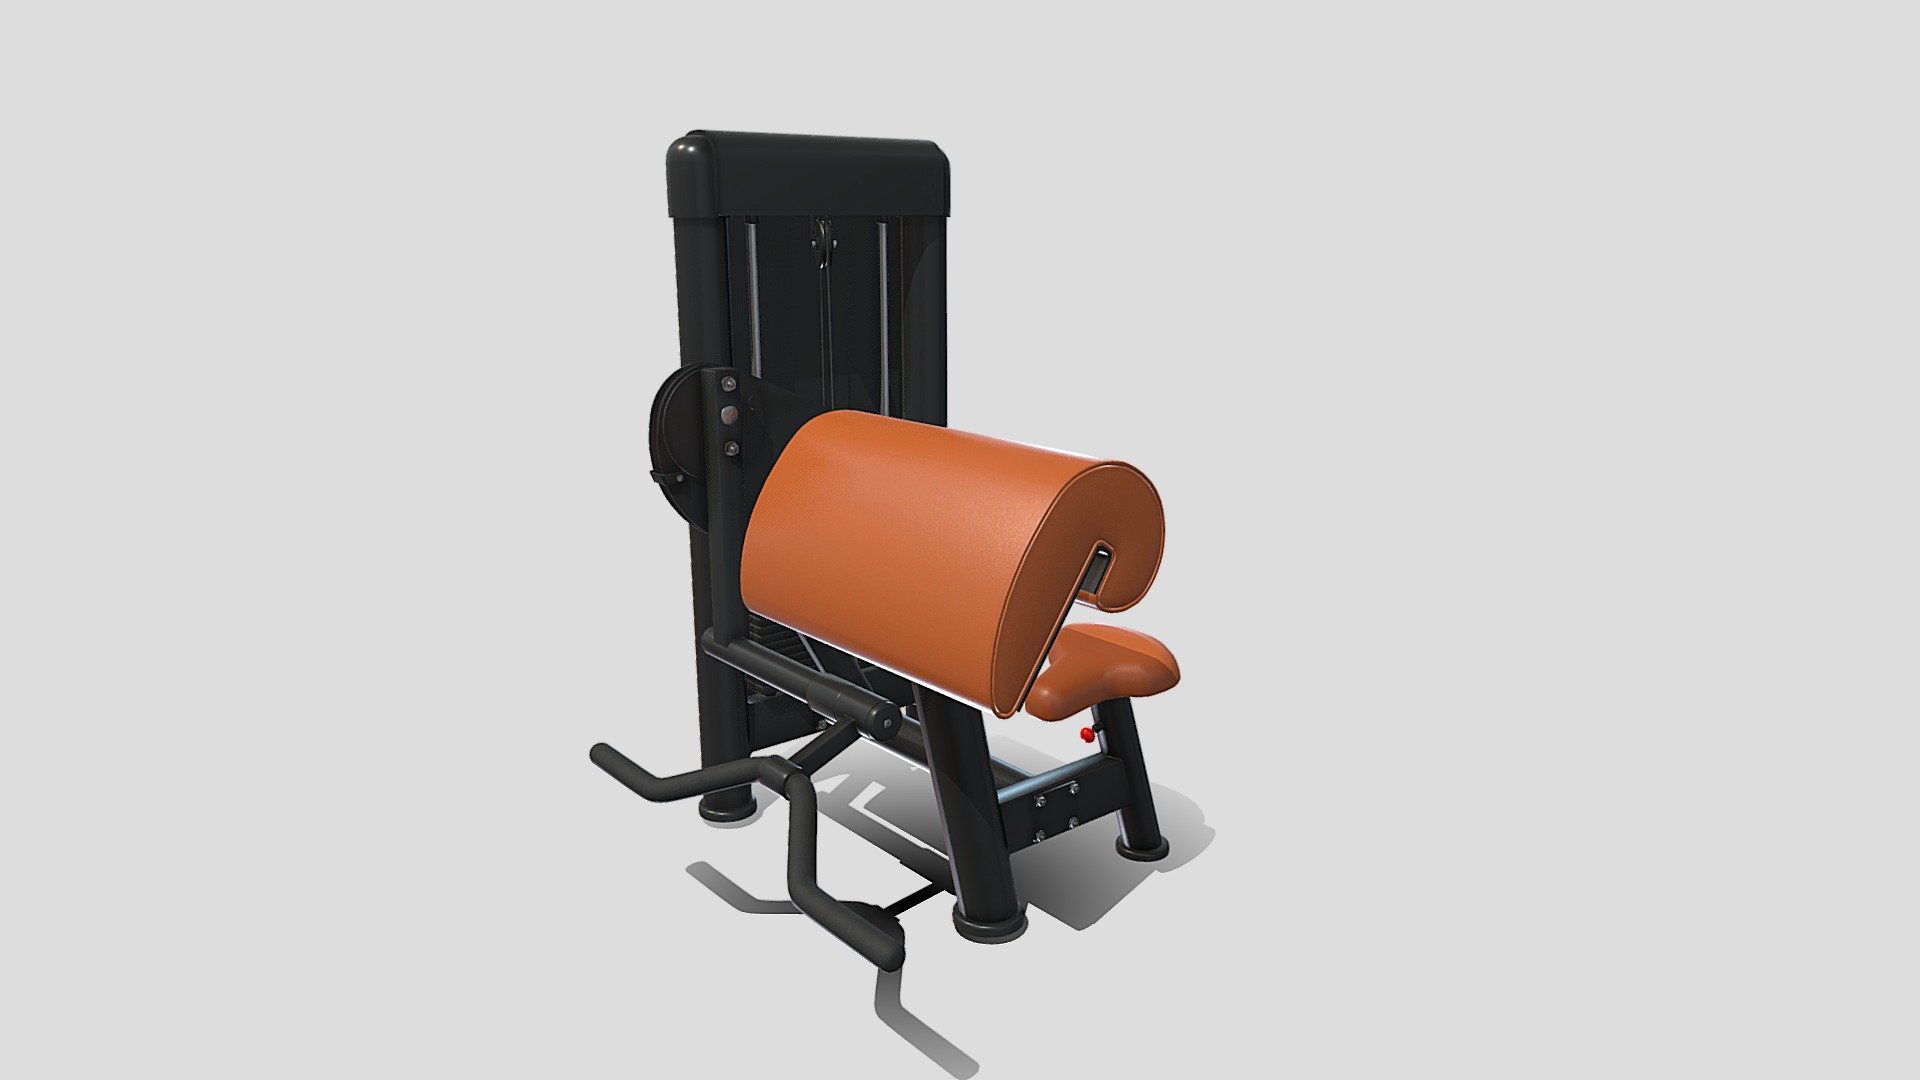 Gym machine 3d model built to real size, rendered with Cycles in Blender, as per seen on attached images. 

File formats:
-.blend, rendered with cycles, as seen in the images;
-.obj, with materials applied;
-.dae, with materials applied;
-.fbx, with materials applied;
-.stl;

Files come named appropriately and split by file format.

3D Software:
The 3D model was originally created in Blender 3.1 and rendered with Cycles.

Materials and textures:
The models have materials applied in all formats, and are ready to import and render.
Materials are image based using PBR, the model comes with five 4k png image textures.

Preview scenes:
The preview images are rendered in Blender using its built-in render engine &lsquo;Cycles'.
Note that the blend files come directly with the rendering scene included and the render command will generate the exact result as seen in previews.

General:
The models are built mostly out of quads.

For any problems please feel free to contact me.

Don't forget to rate and enjoy! - Curl machine - Buy Royalty Free 3D model by dragosburian 3d model